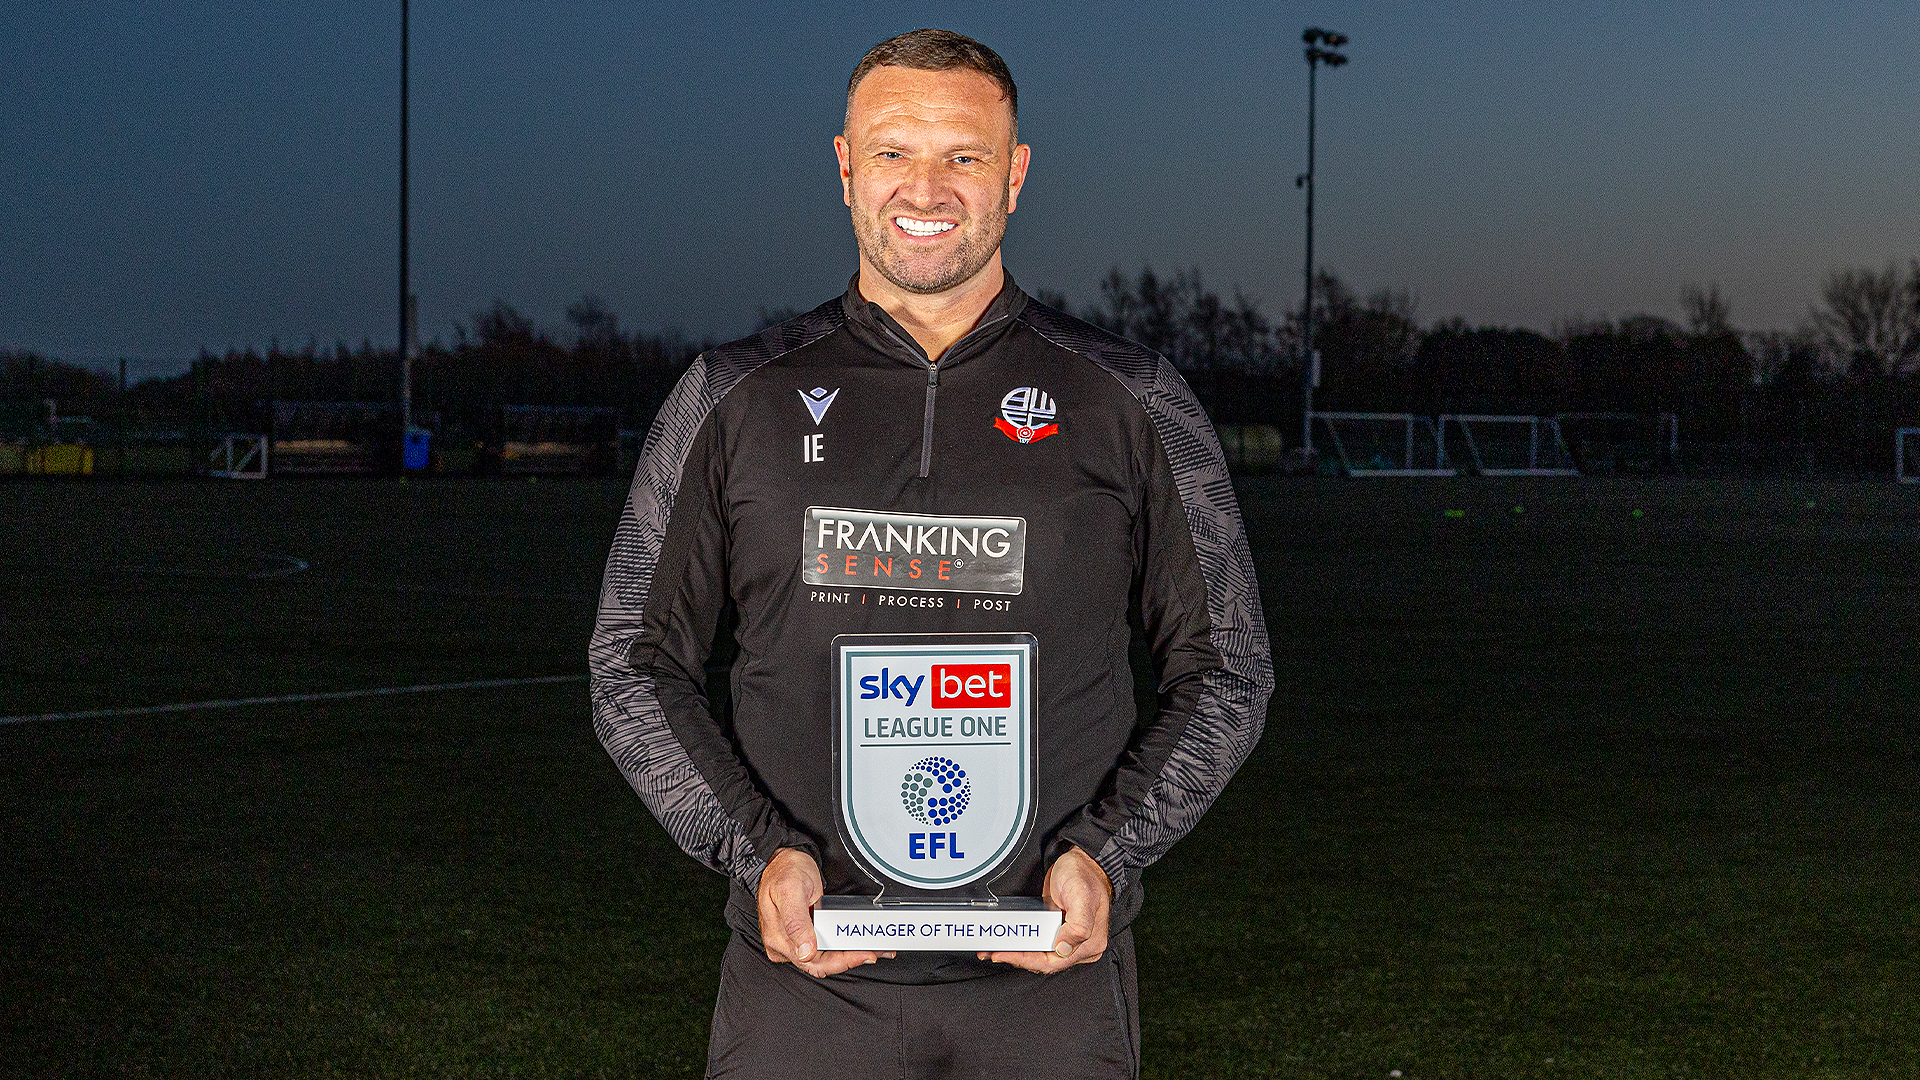 evatt manager of the month